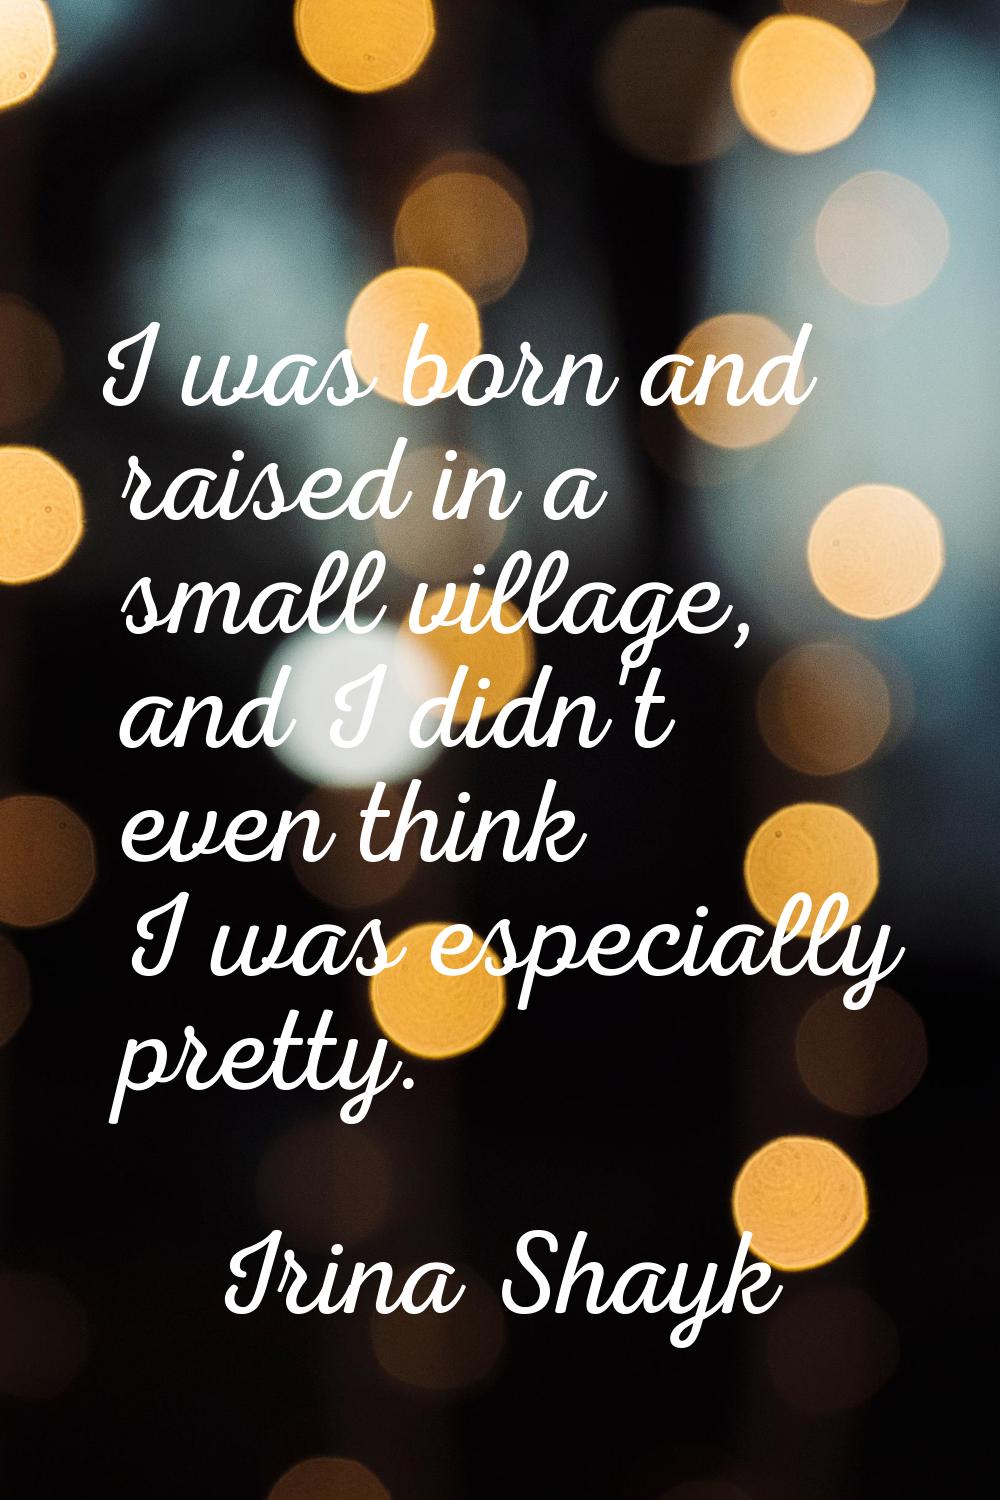 I was born and raised in a small village, and I didn't even think I was especially pretty.